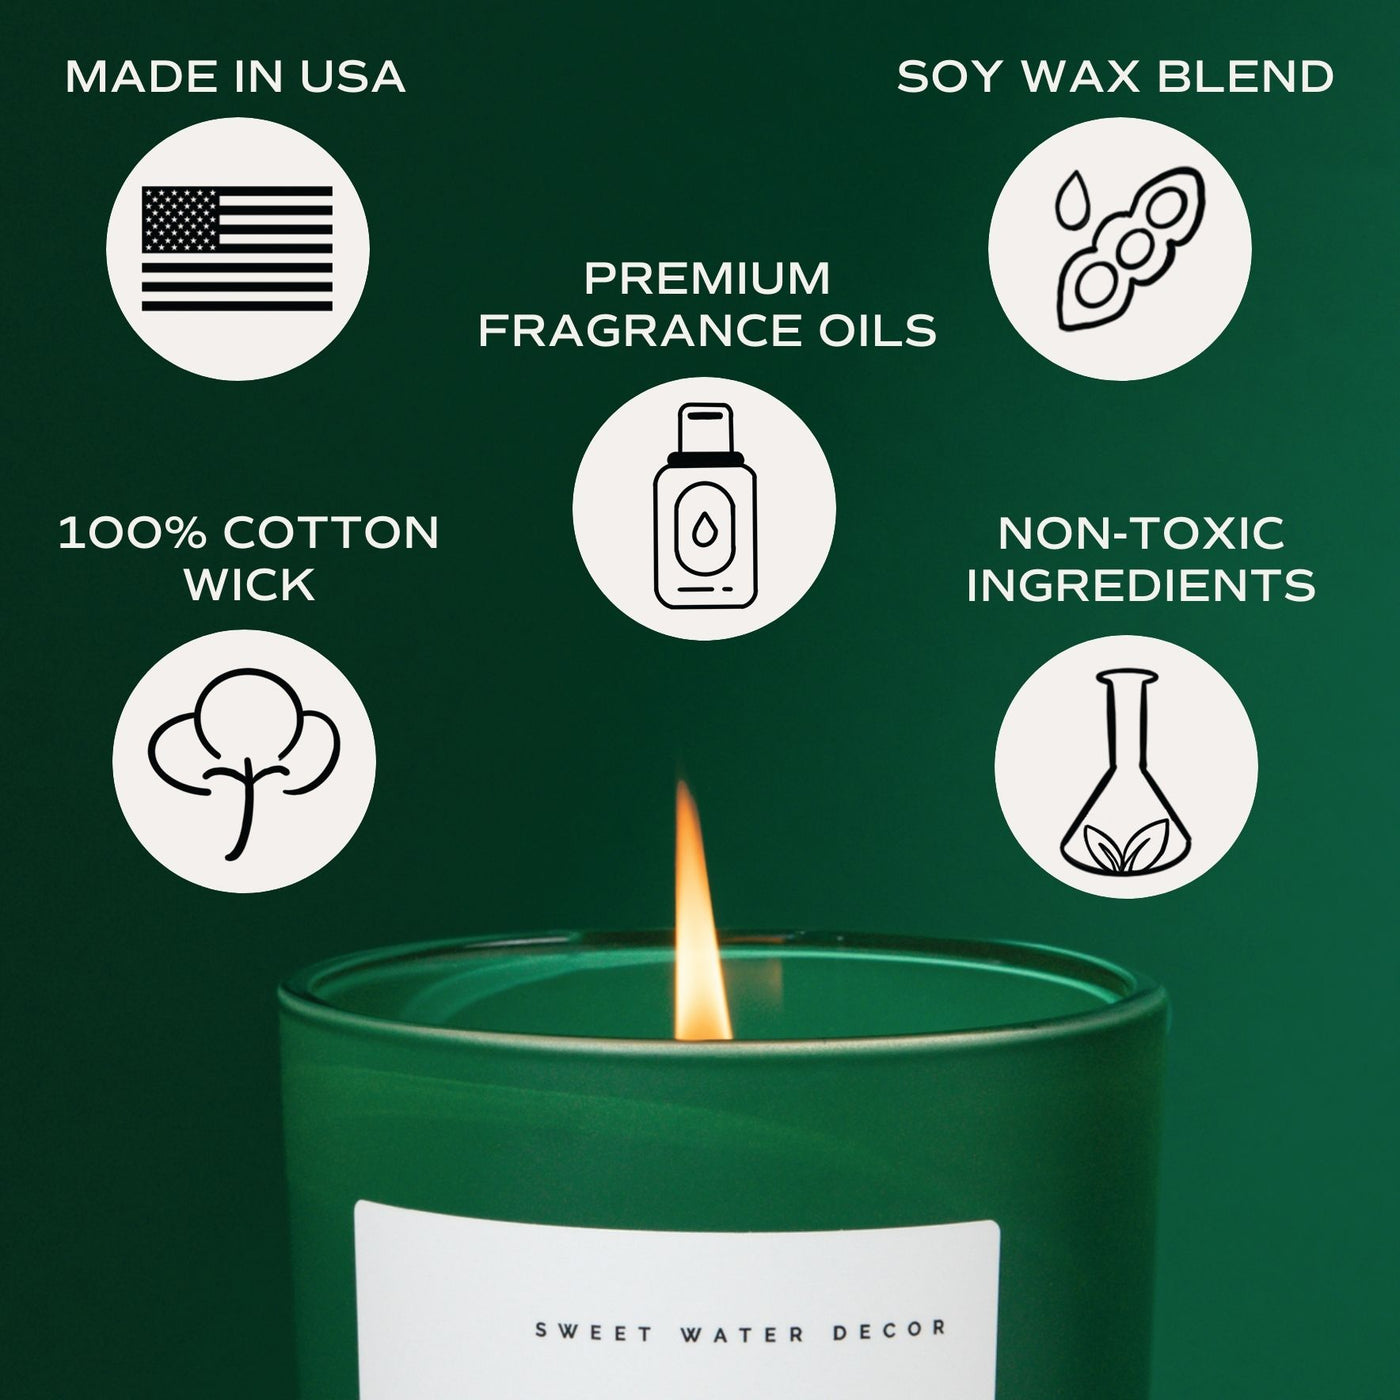 Holiday Cheer Soy Candle - Green Matte Jar - 15 oz